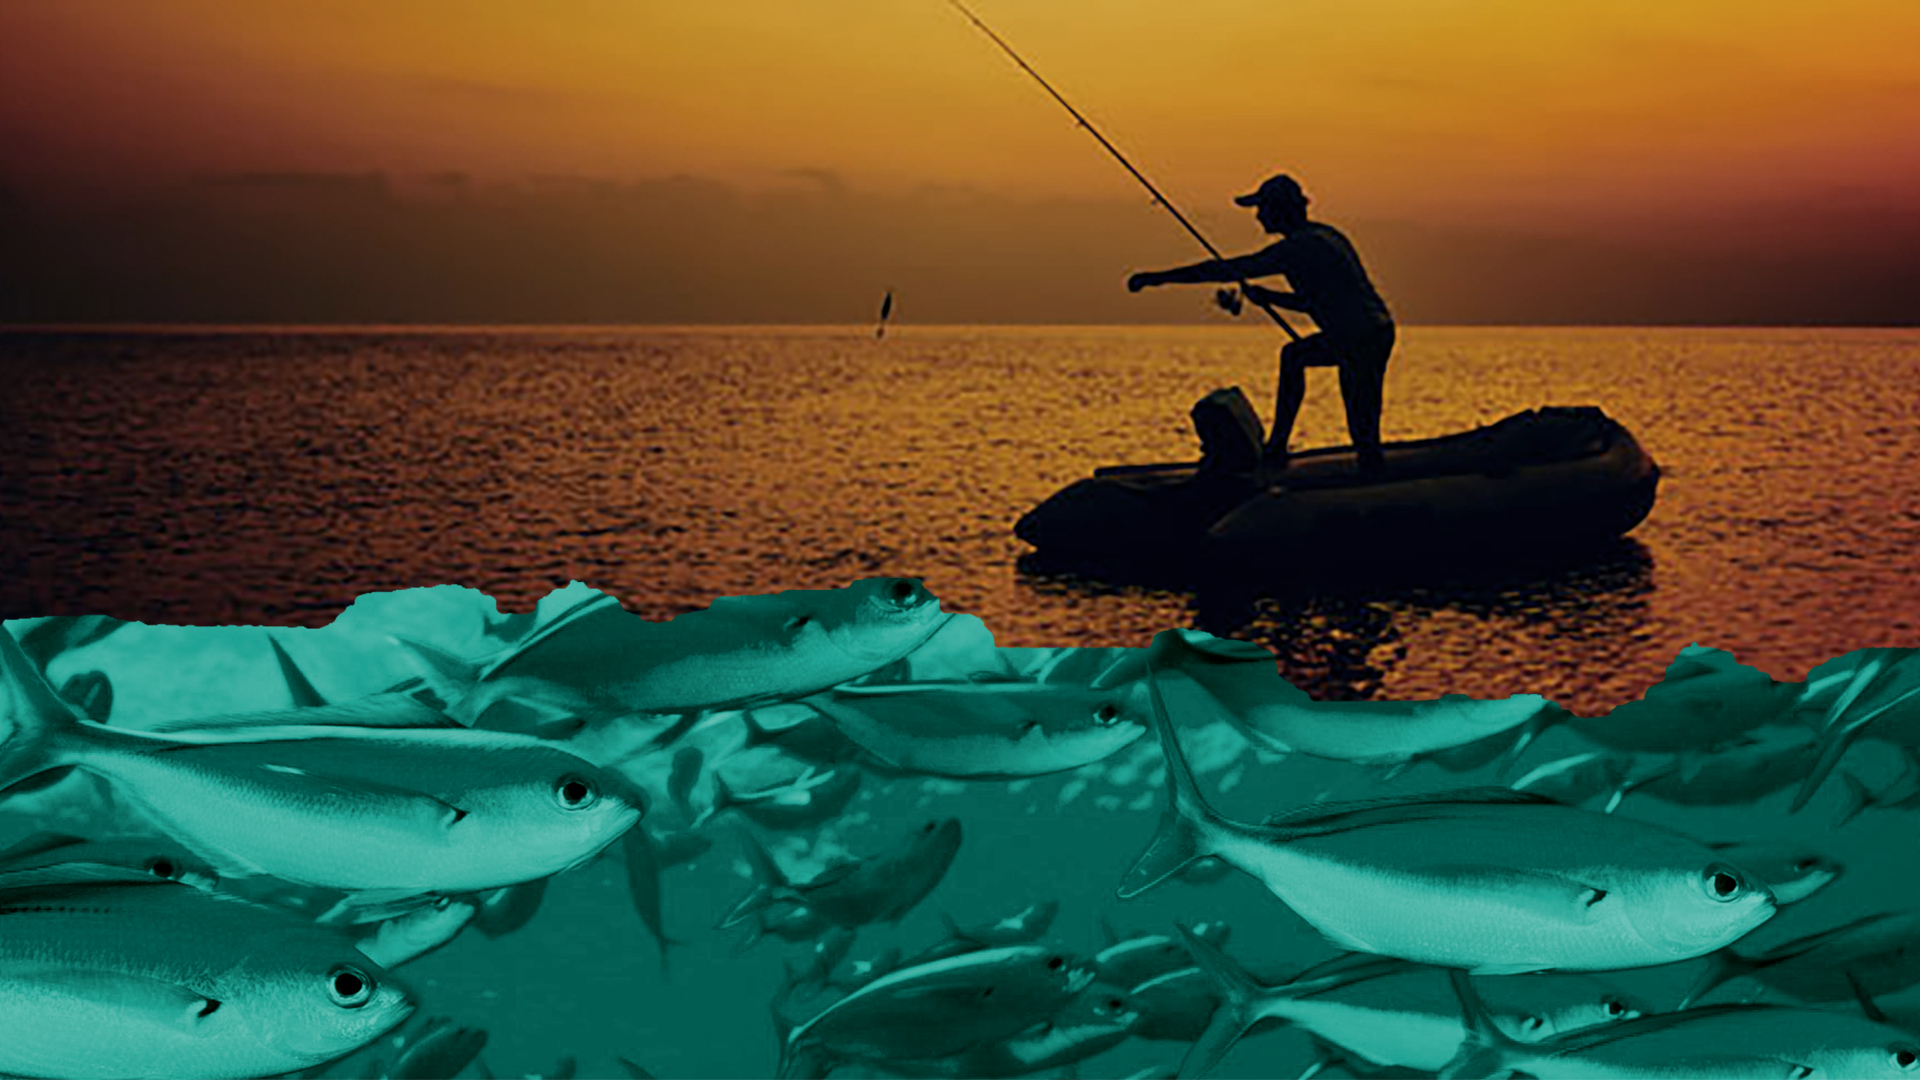 A angler silhouetted by golden sunset casts a line into a calm sea. Beneath the surface, a feeding frenzy of large fish. Metaphor for campaigning content- fish where the fish are.